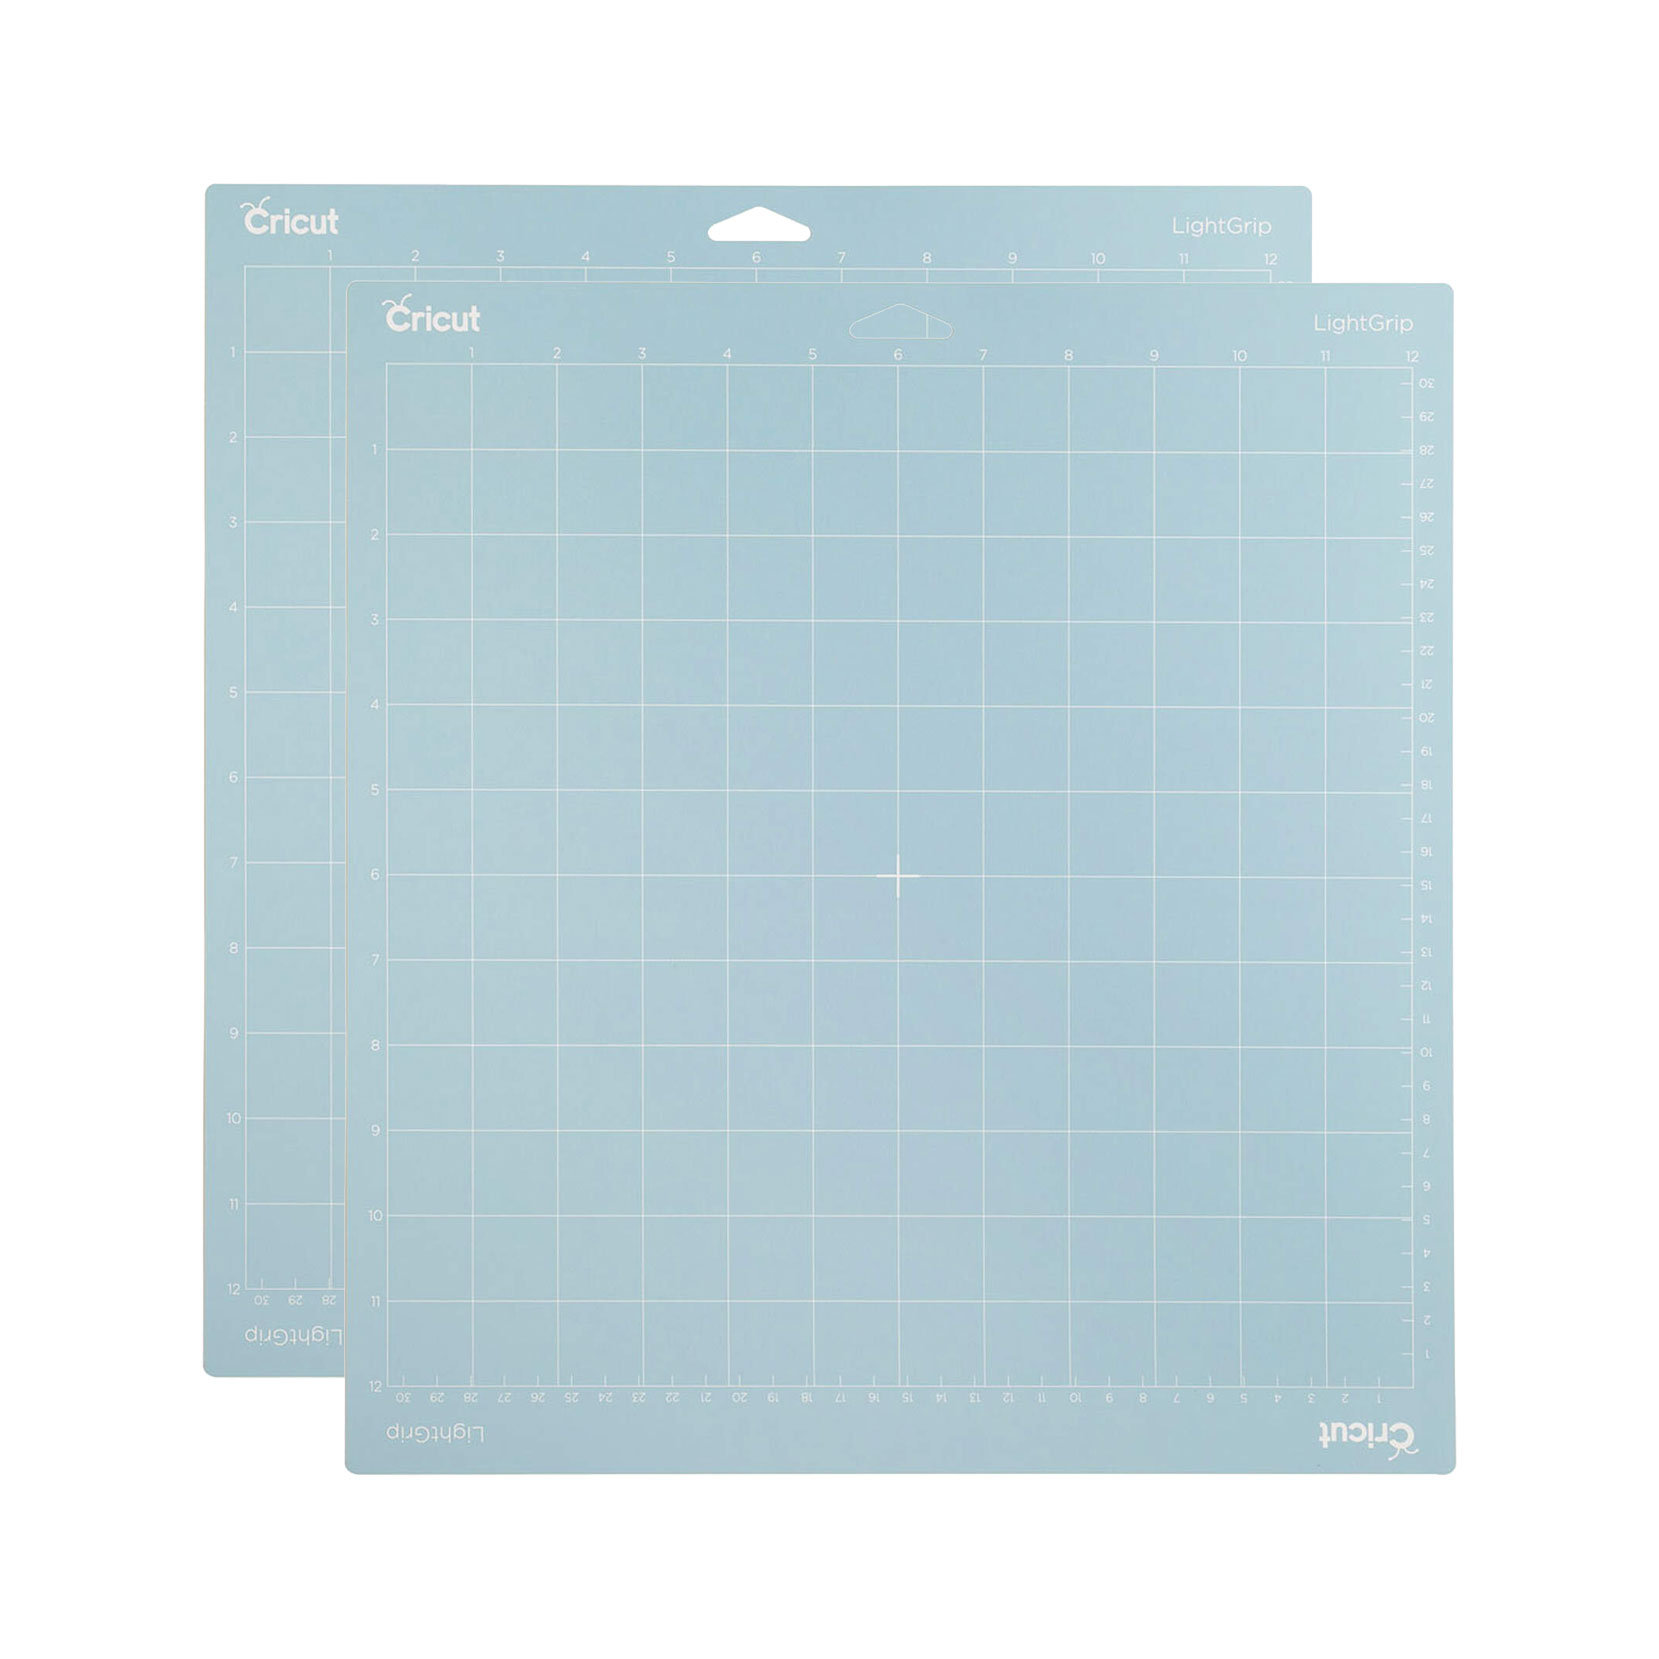  Clearly Amazing Multi-Use Mat - Light Grip - Transparent with Grid - Extra Large - 12 x 12 - 1 Sheet